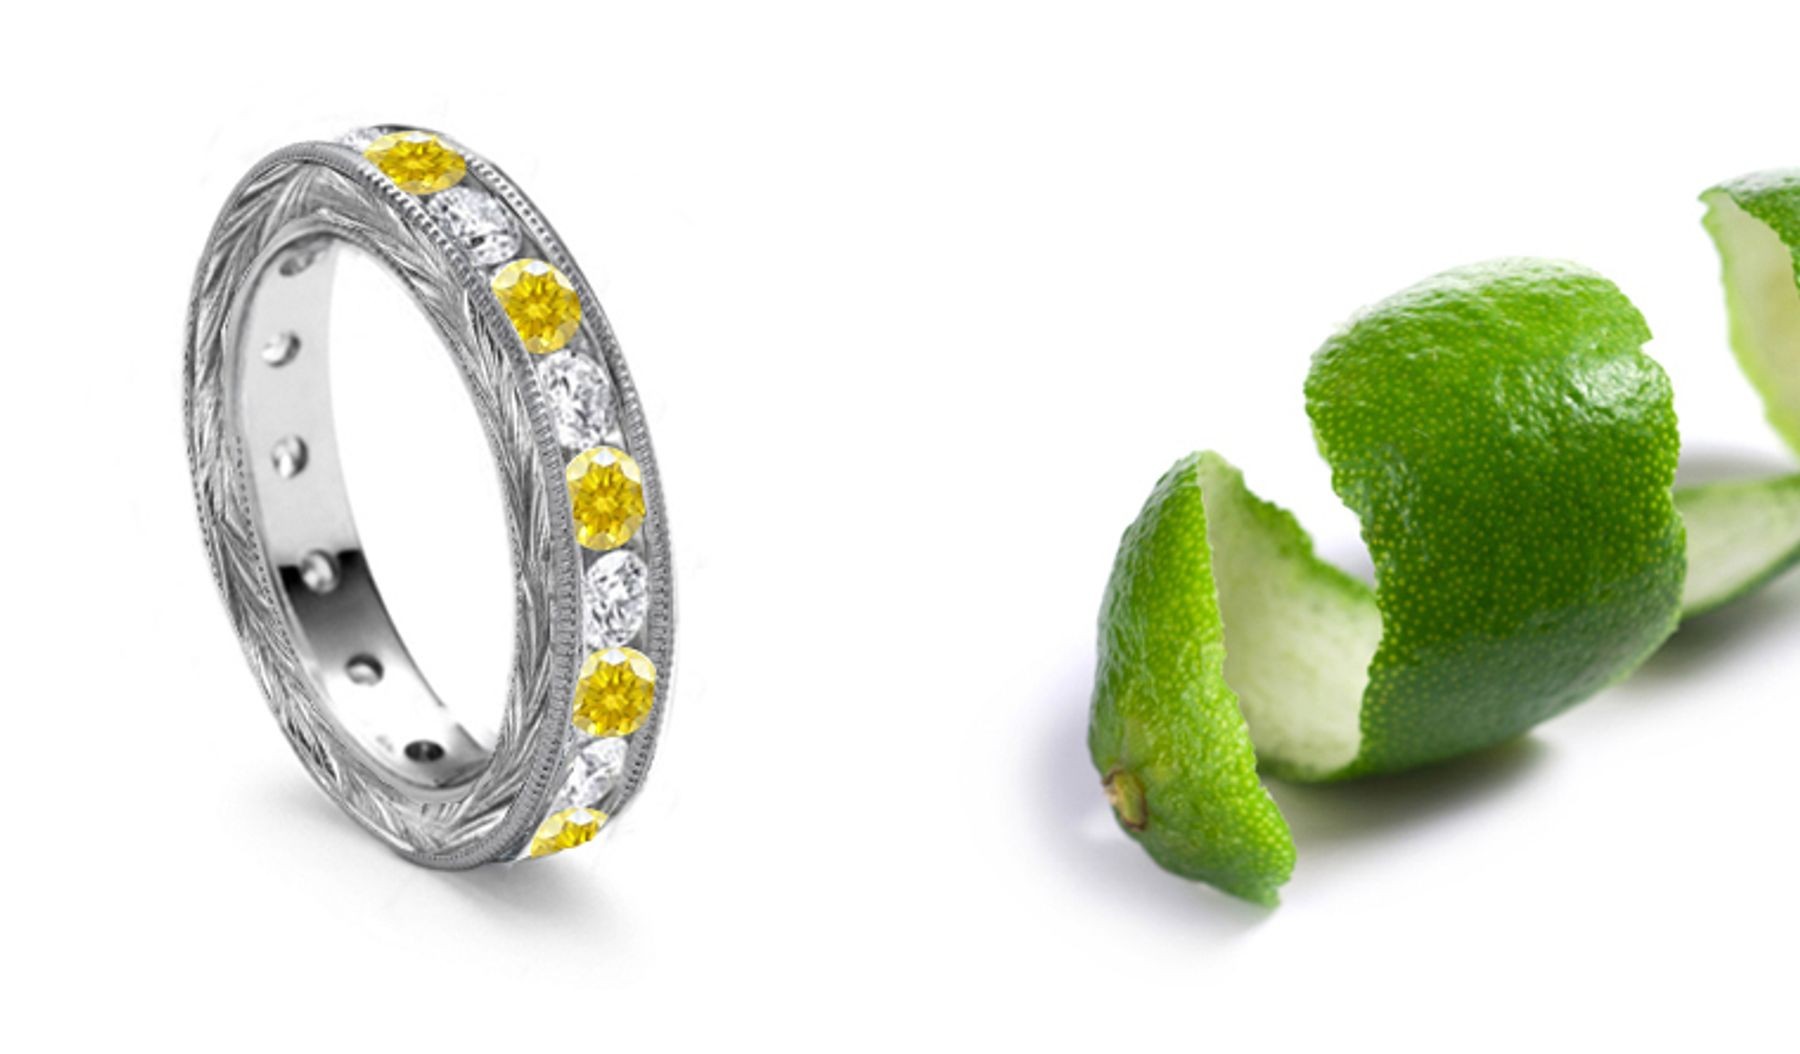 Bright Yellow Diamond Eternity Band with Fine Milgrain & Hand Engraved Detail Decorated Sides